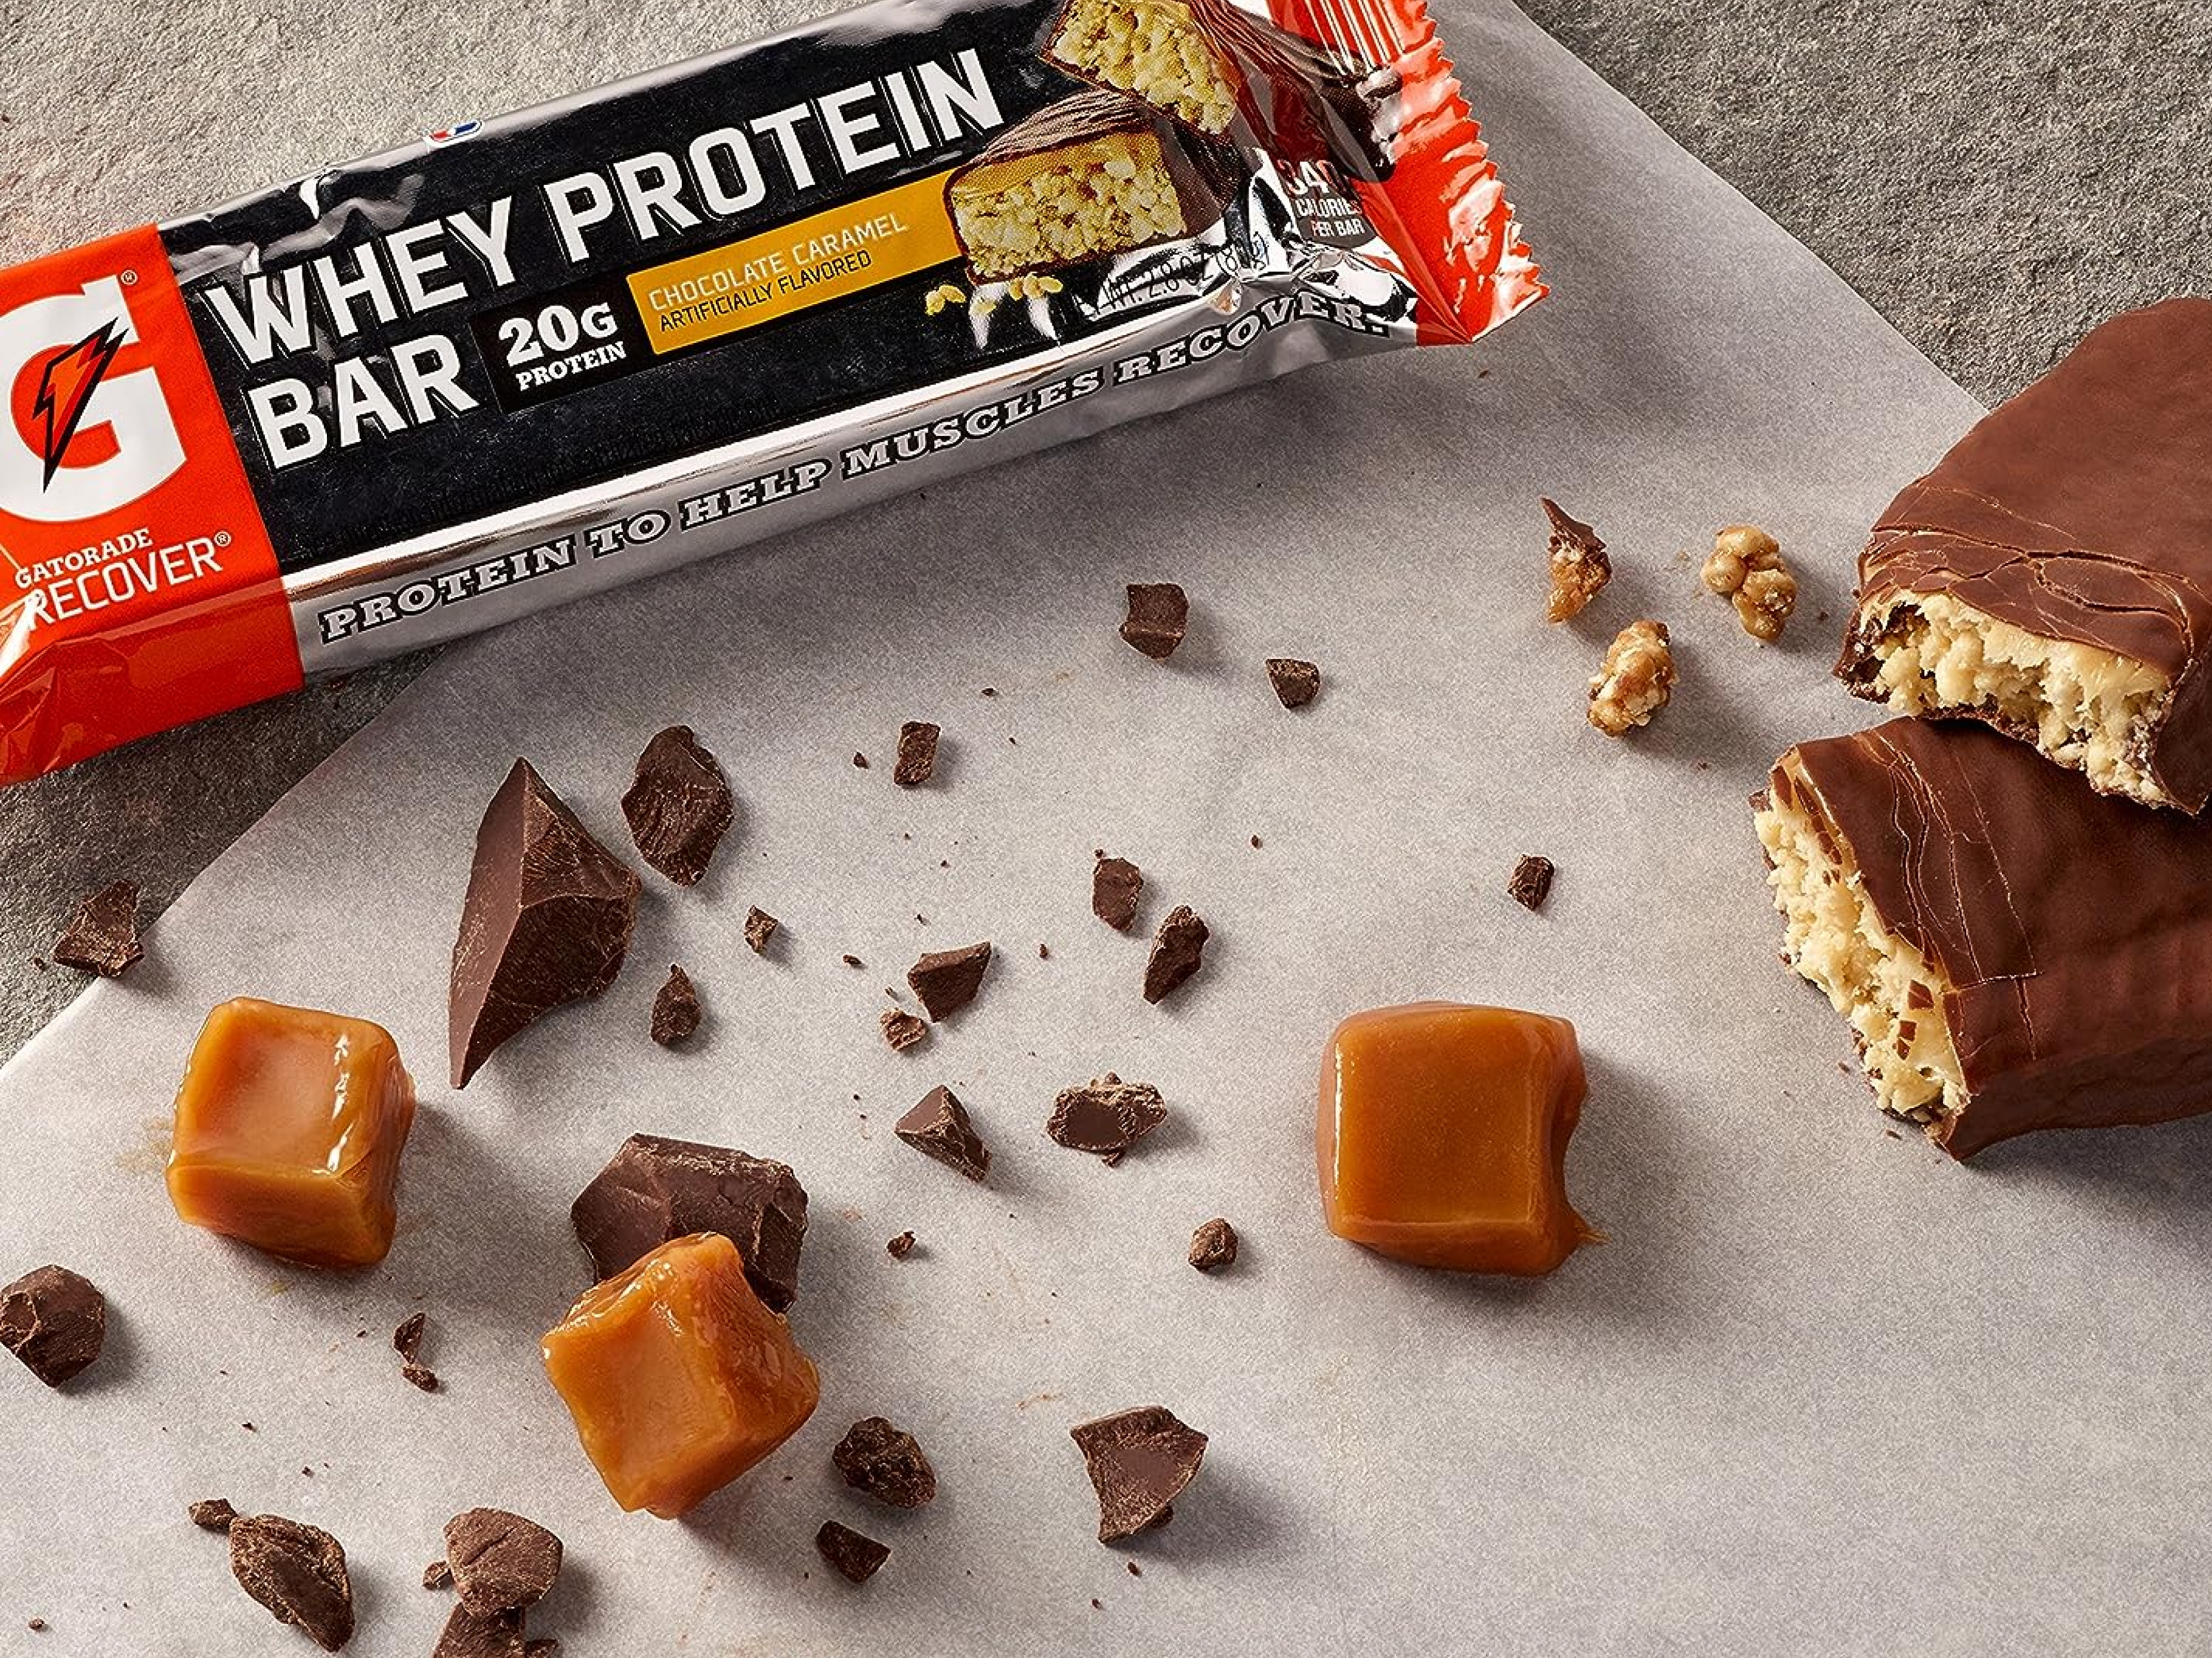 Protein bar with caramel and chocolate